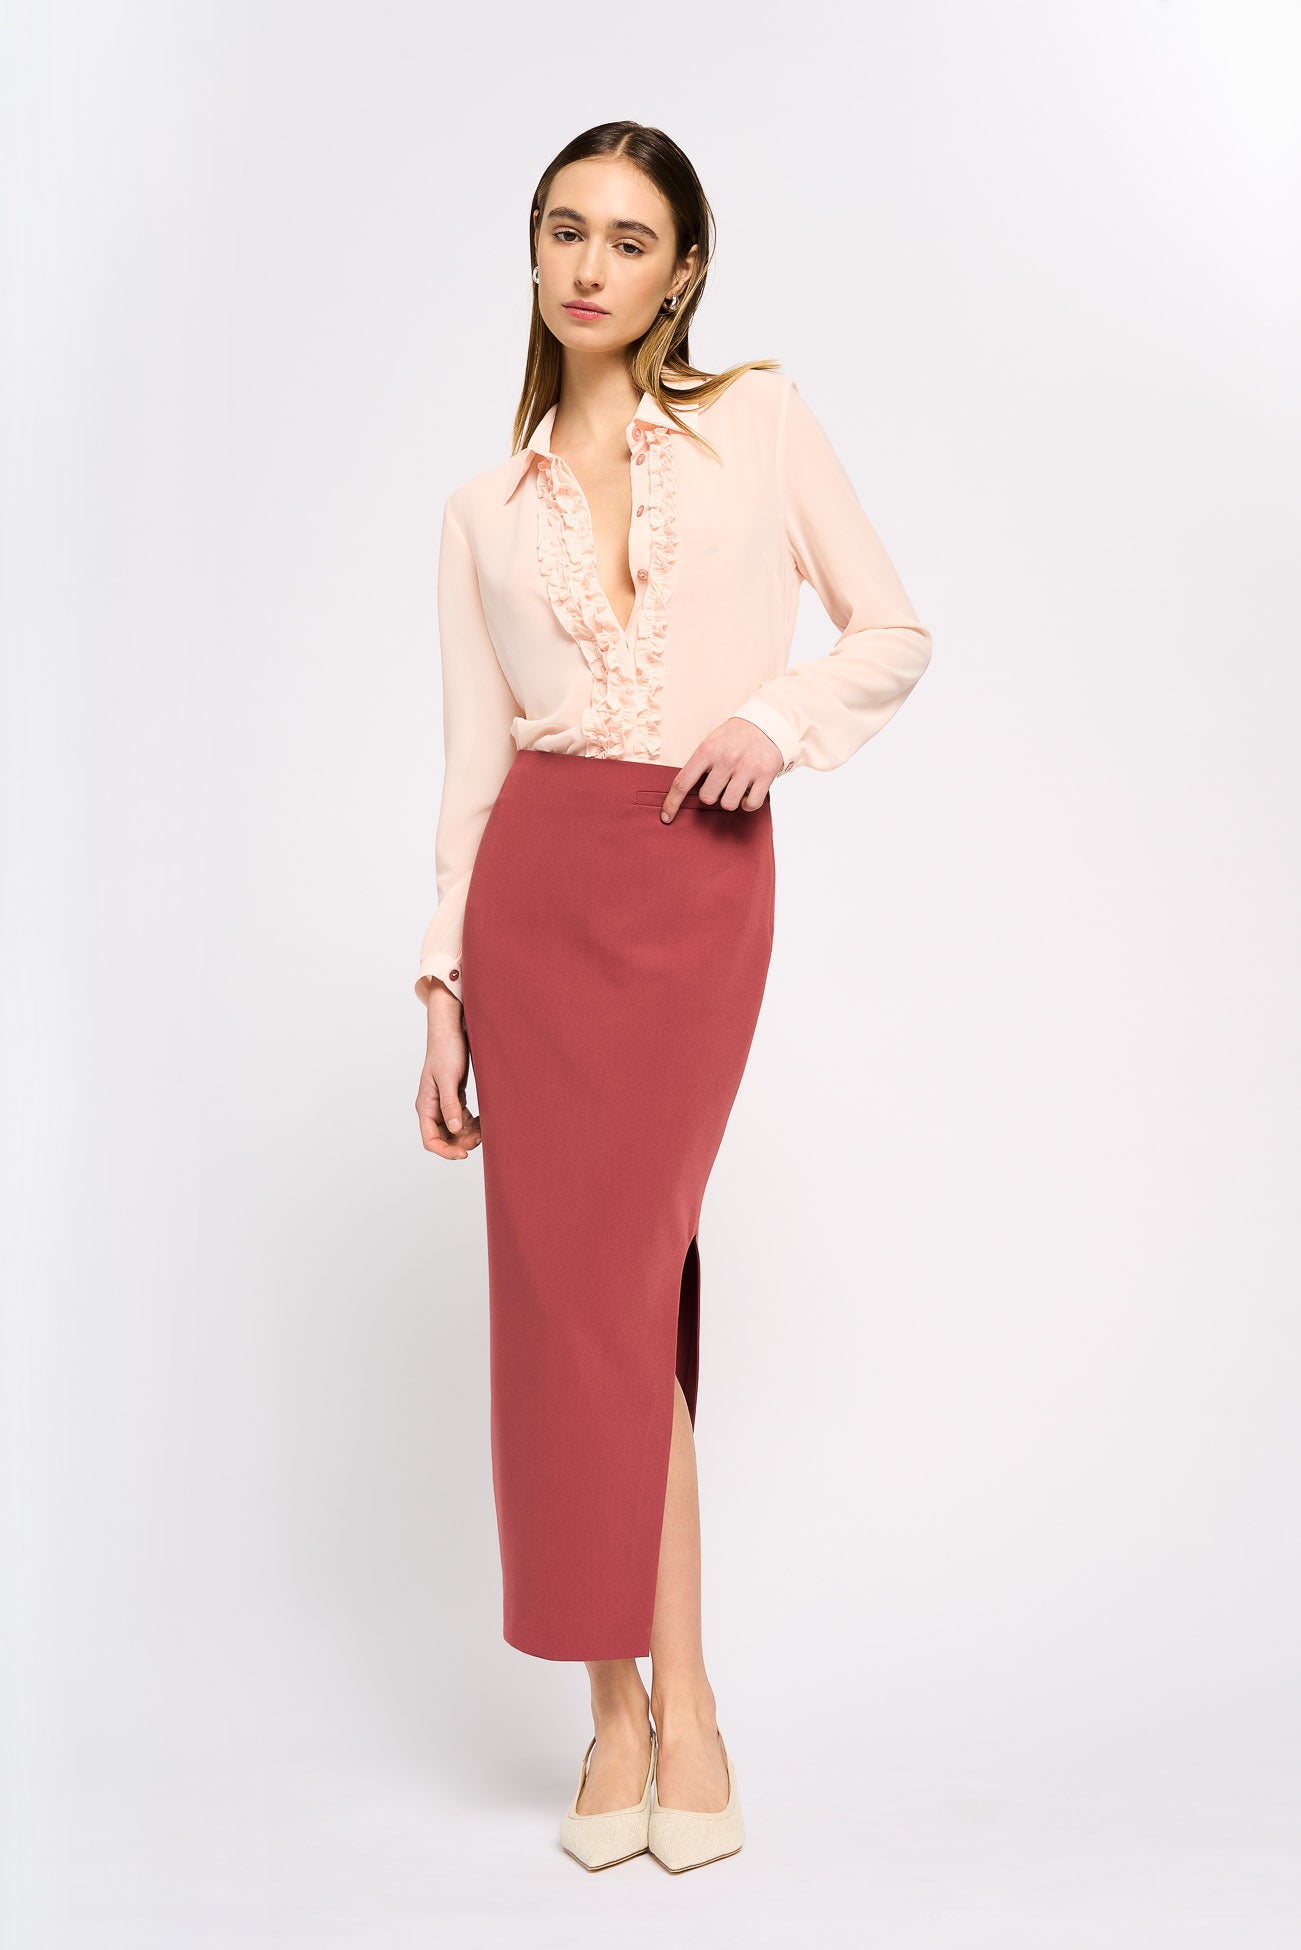 Skirt with slit in tailored fabric